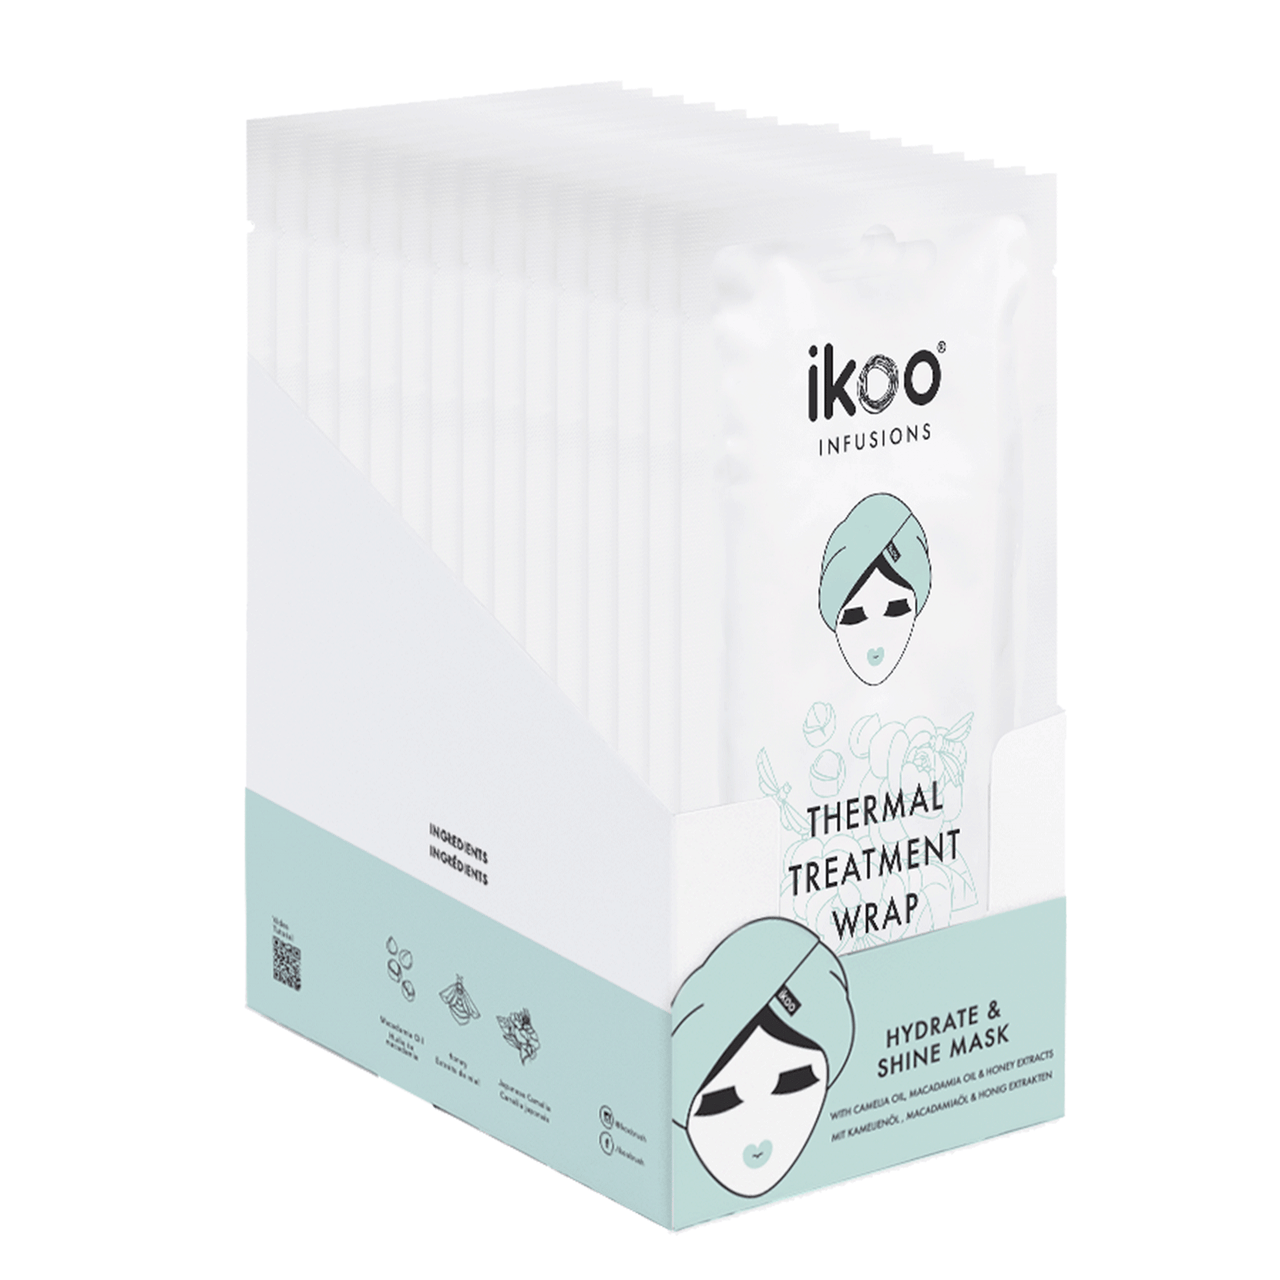 ikoo Thermal Treatment Wrap Hydrate & Shine Hair Mask 15-Count 